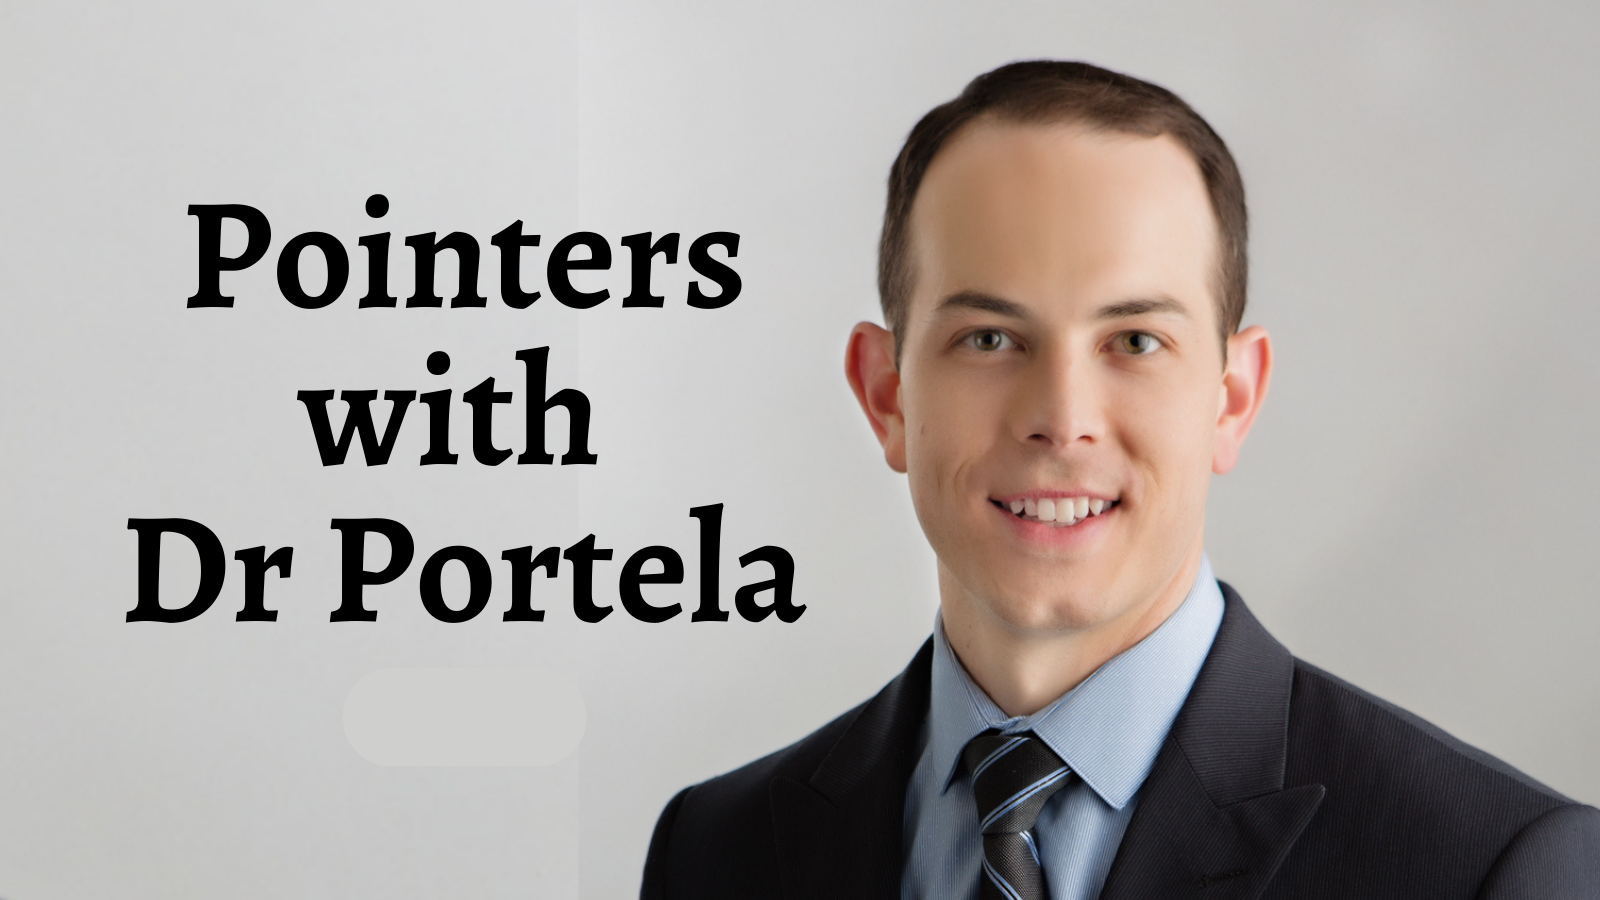 Pointers With Dr Portela: How to Fix Dry Skin